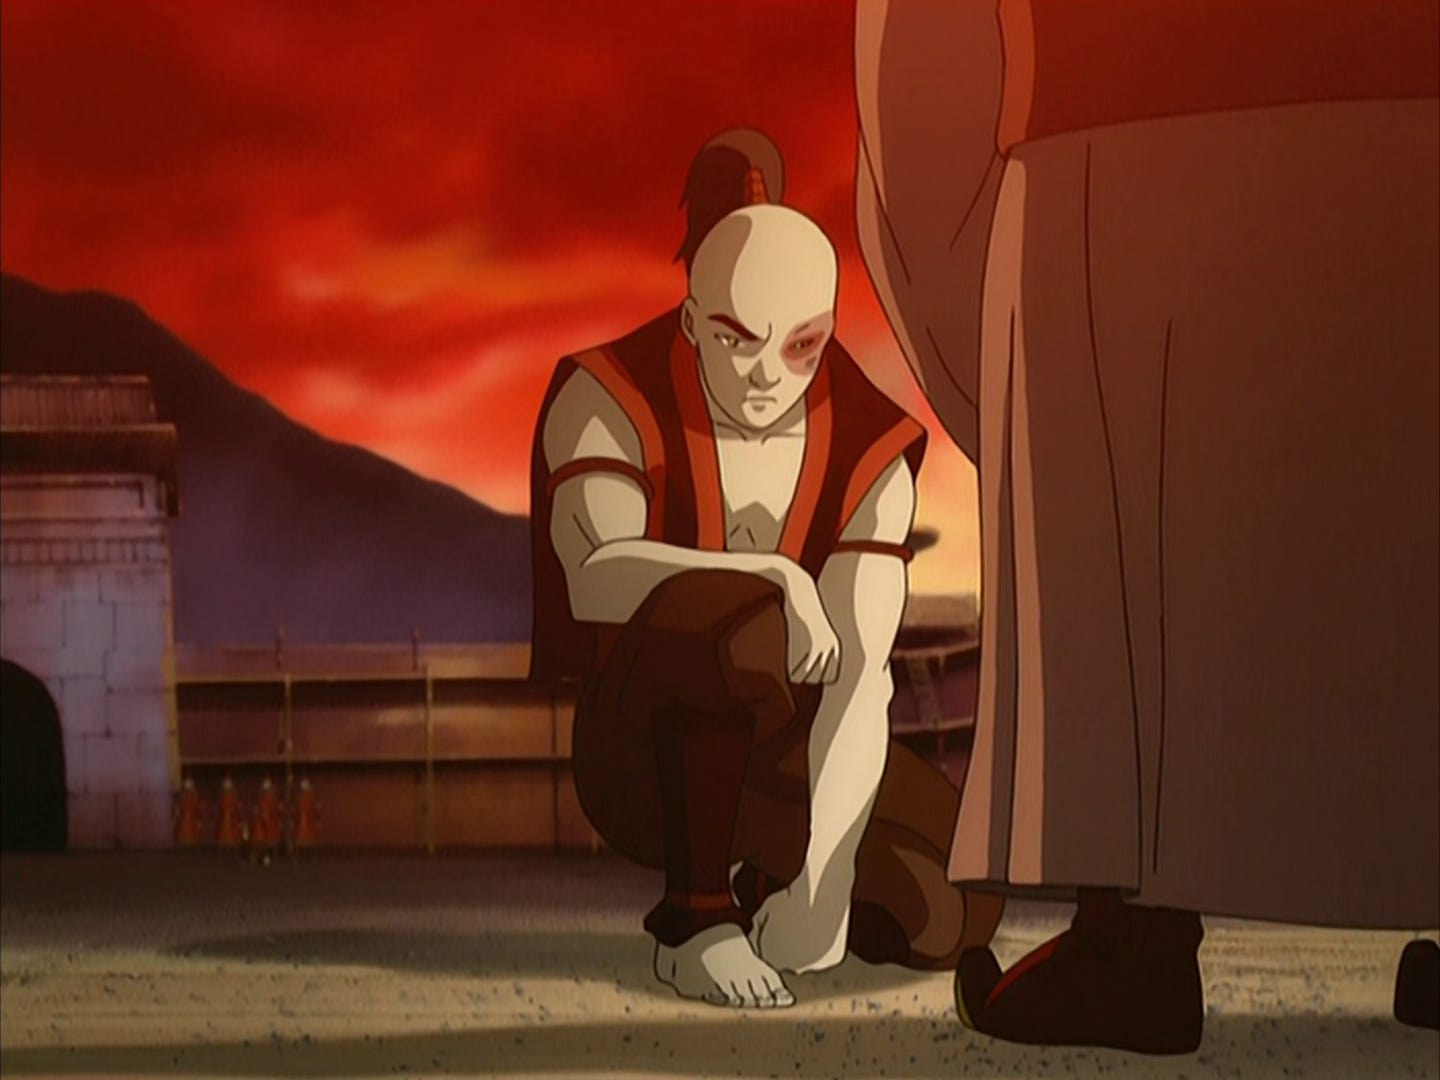 Zuko kneels before Iroh, about to face Zhao in an Agni Kai.